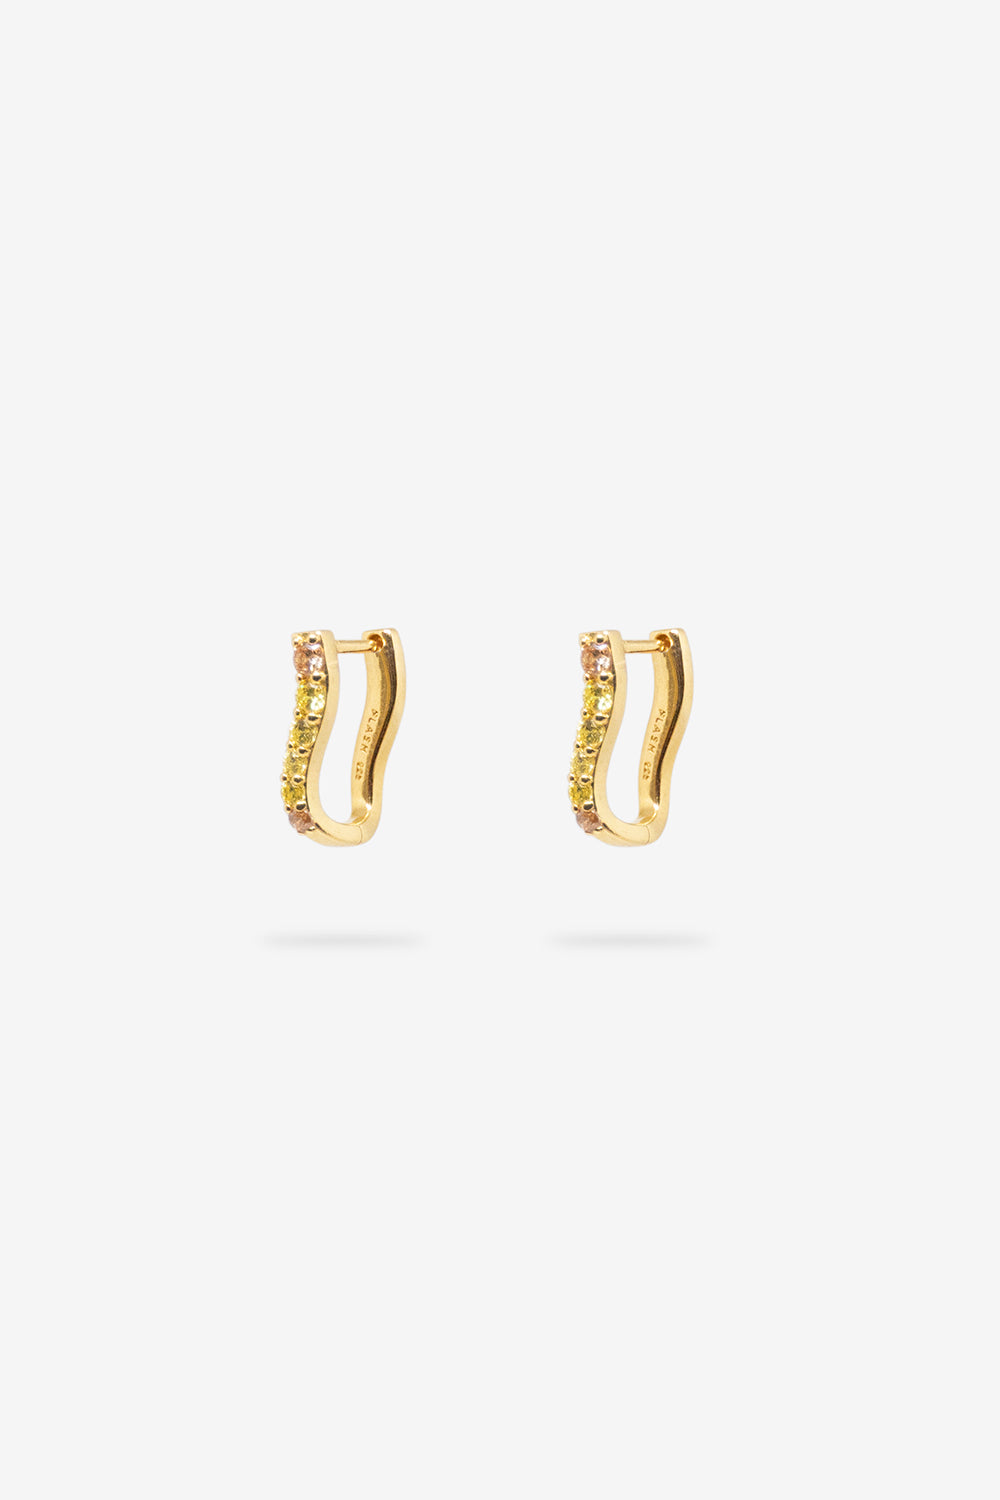 Vague Gemstone Hoops - Champagne Fade - Gold